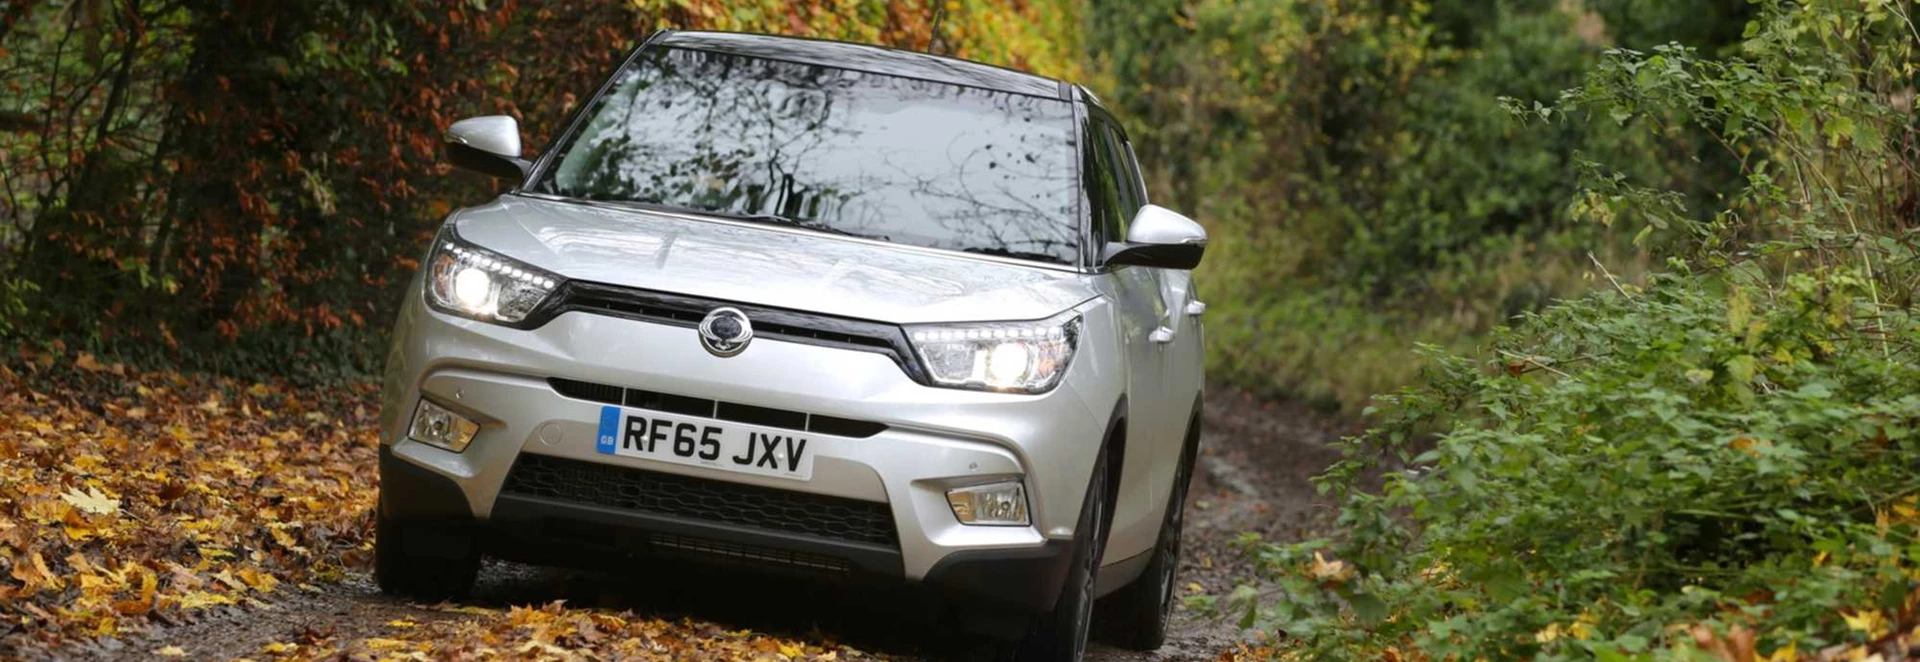 SsangYong Tivoli crossover review 